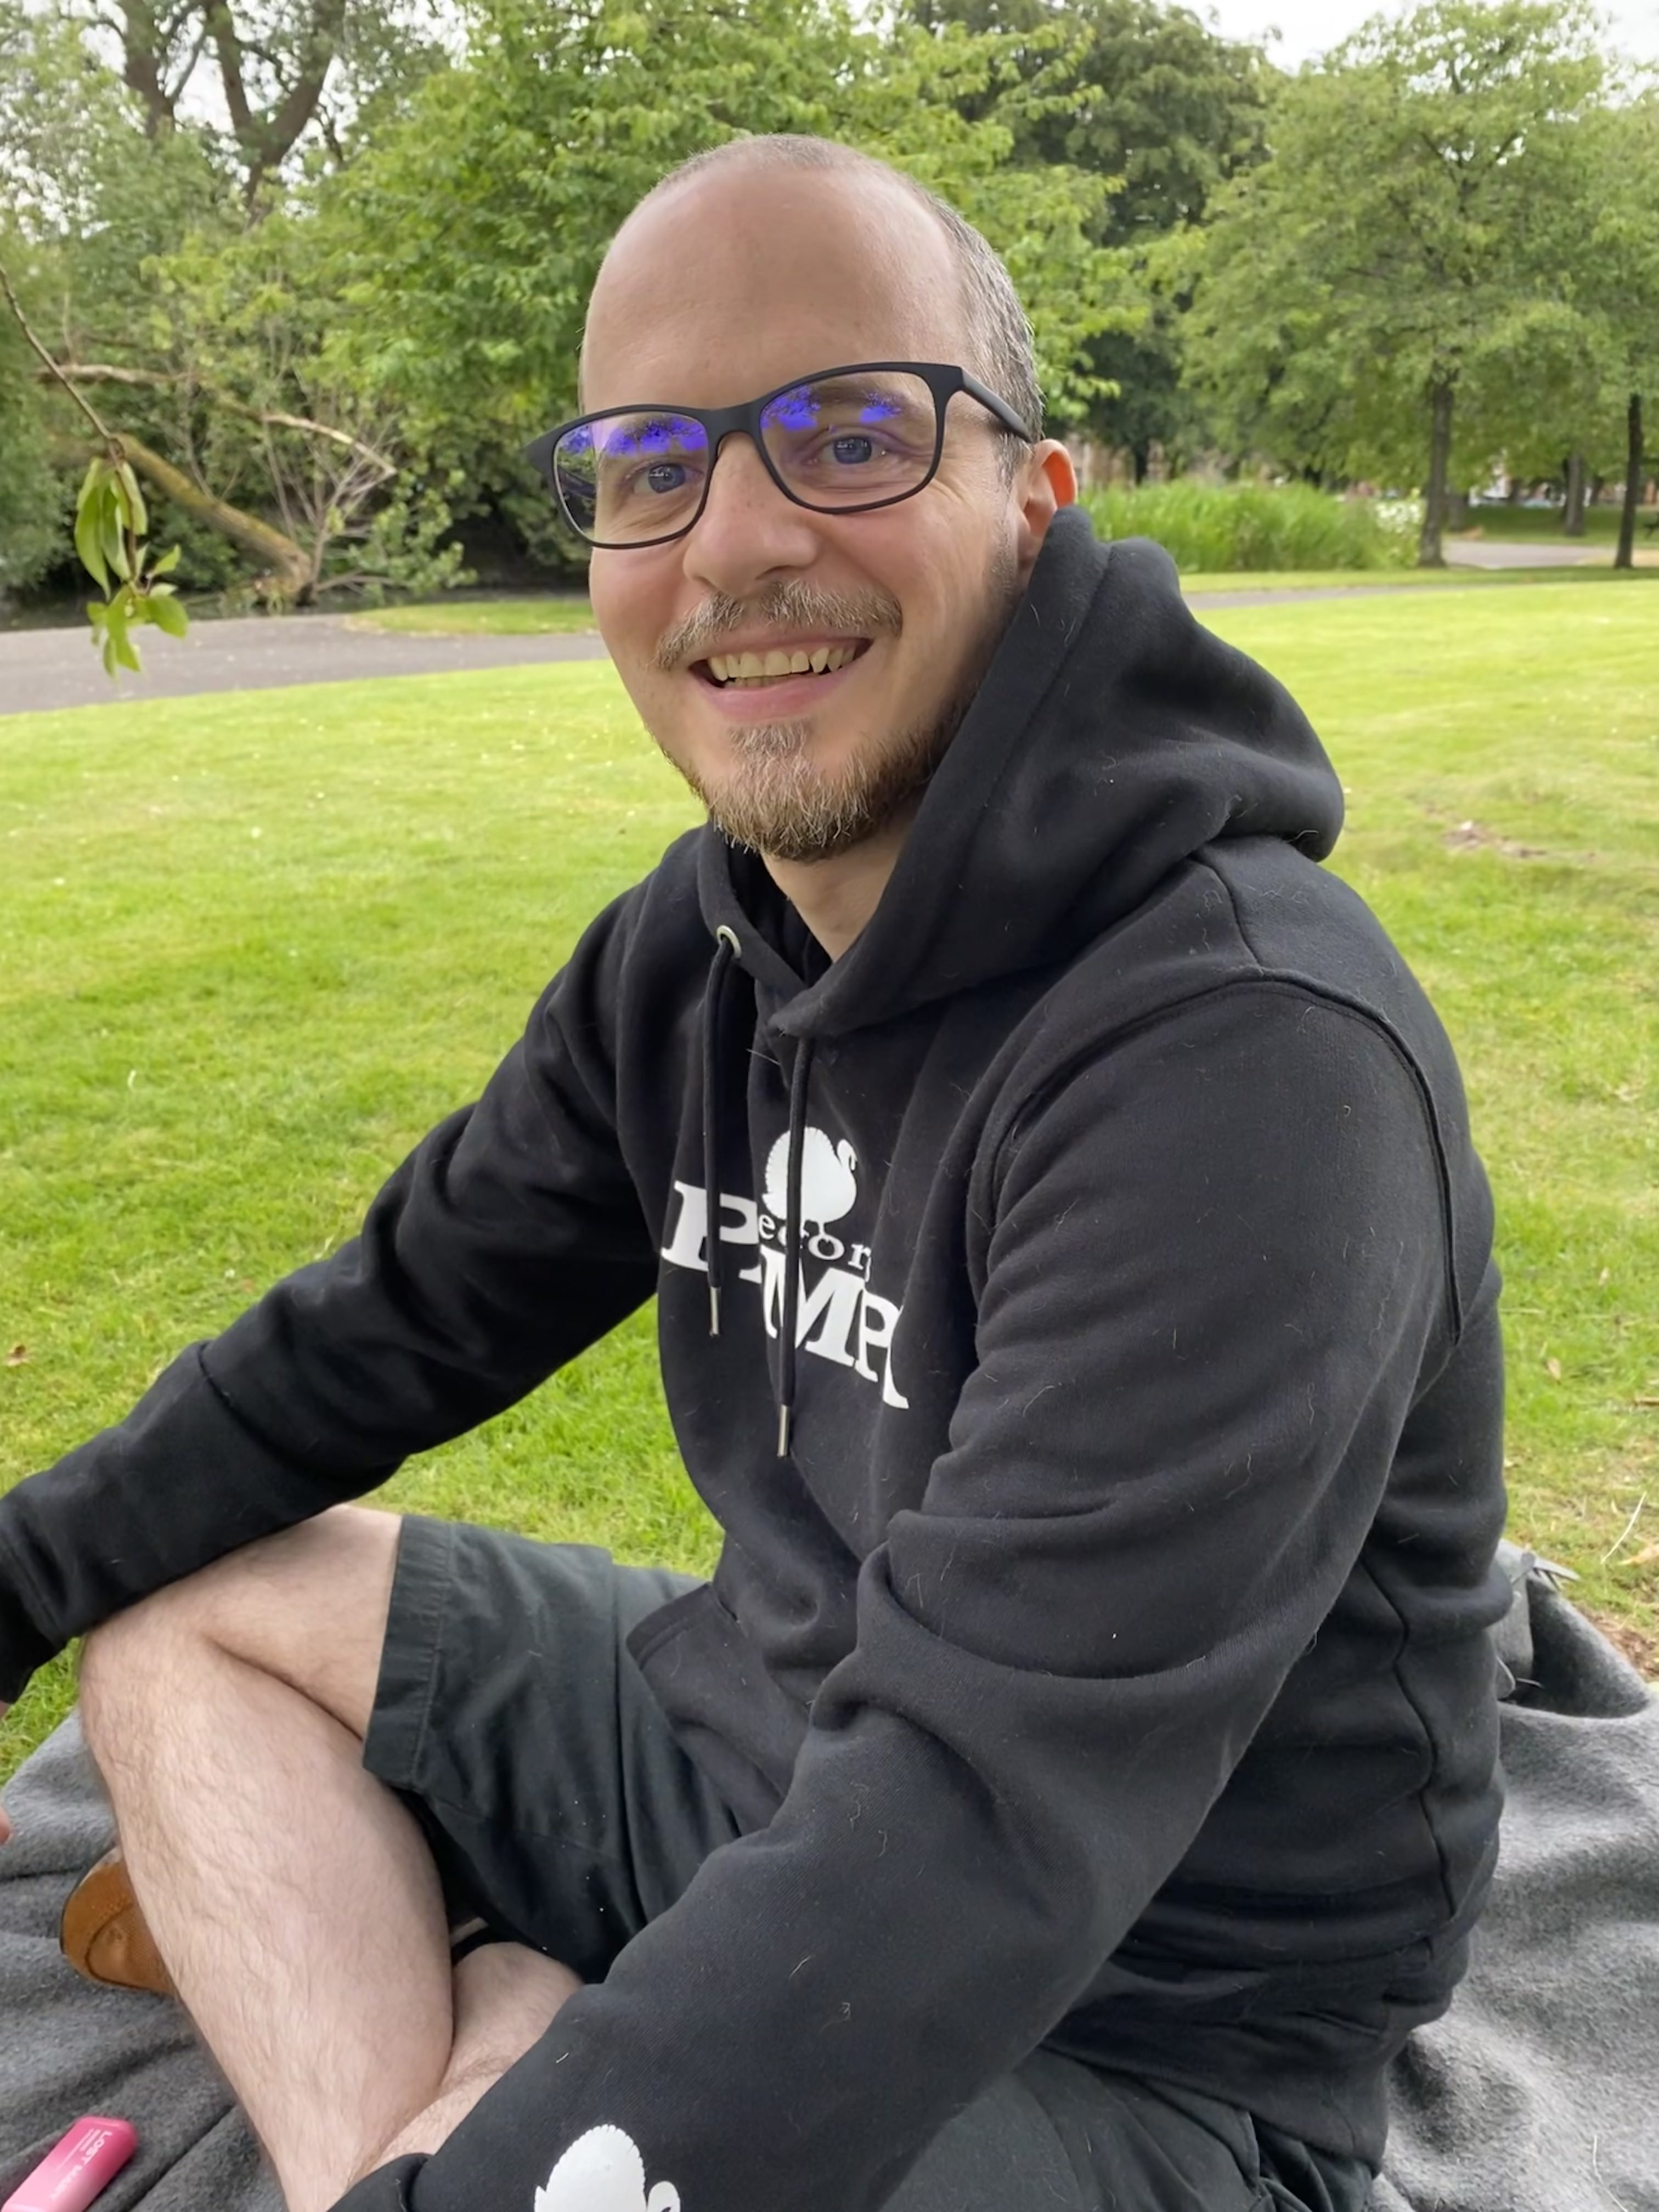 a man with glasses sitting and smiling in the park